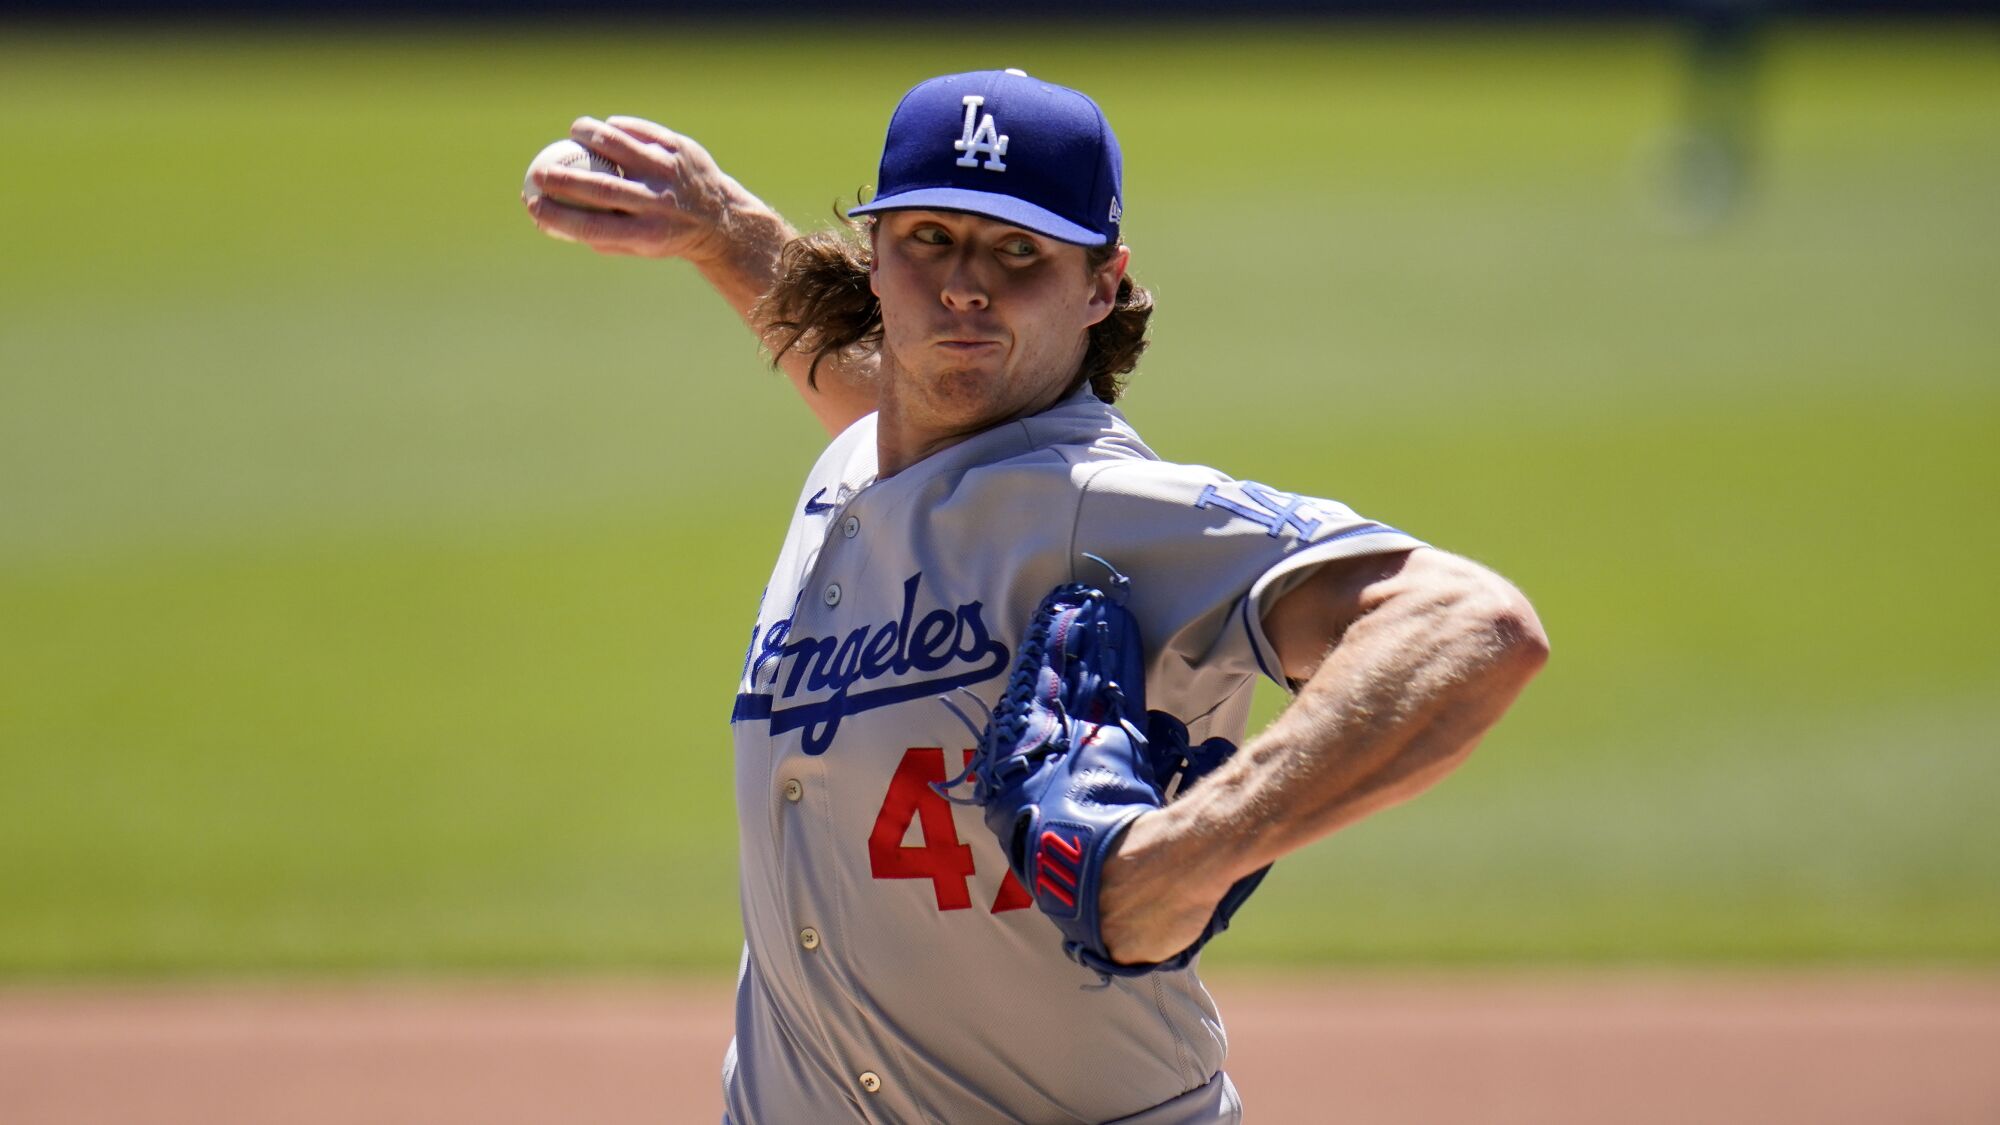 Dodgers' Ryan Pepiot pitches against the Pittsburgh Pirates on May 11, 2022.